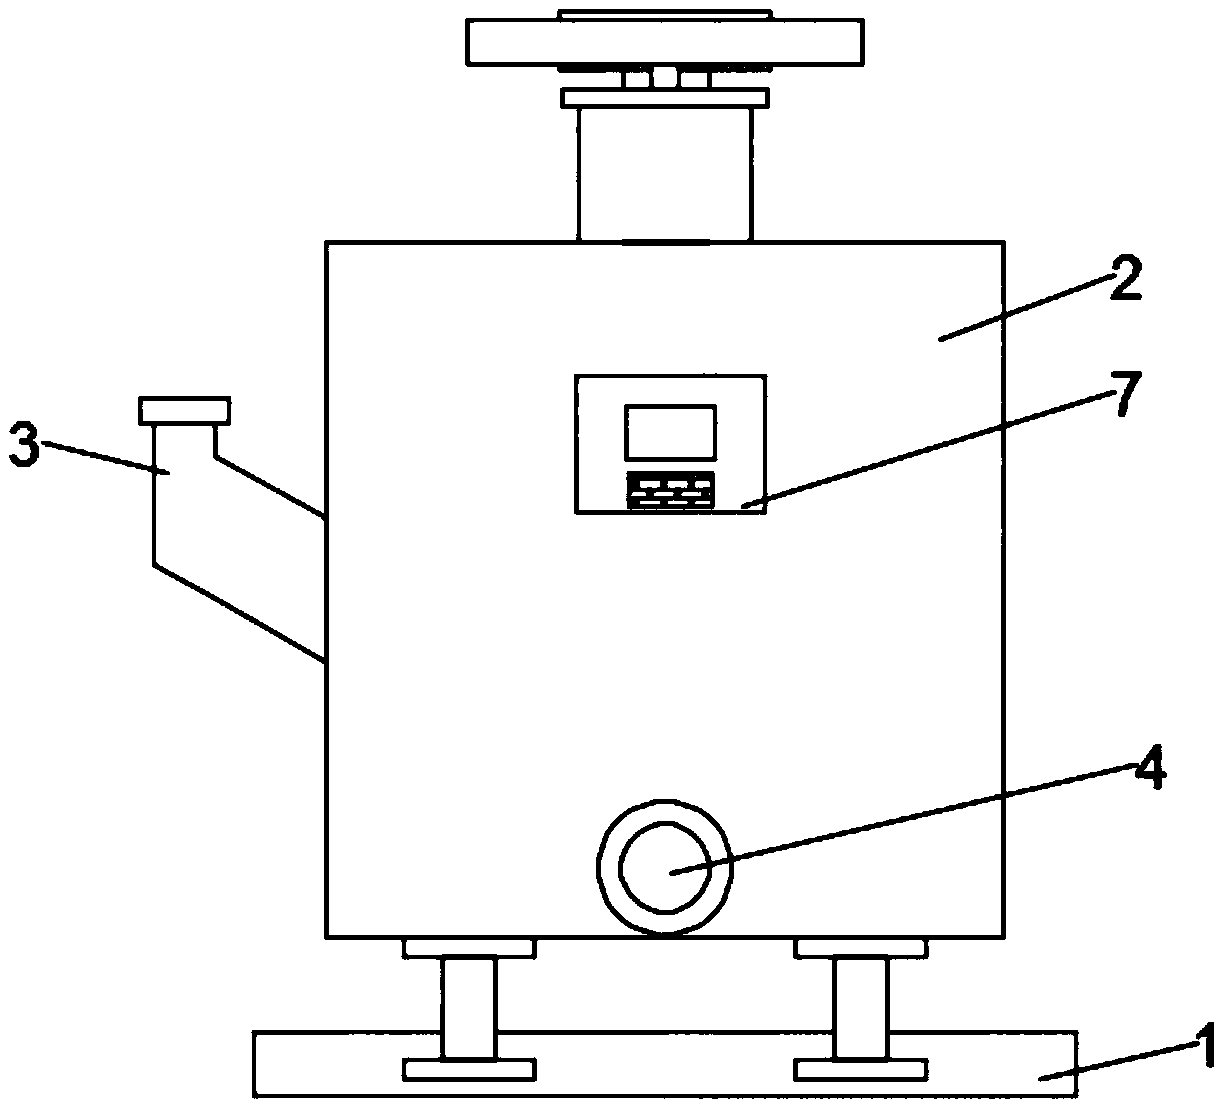 Chemical raw material mixing tank with lifting and stirring device